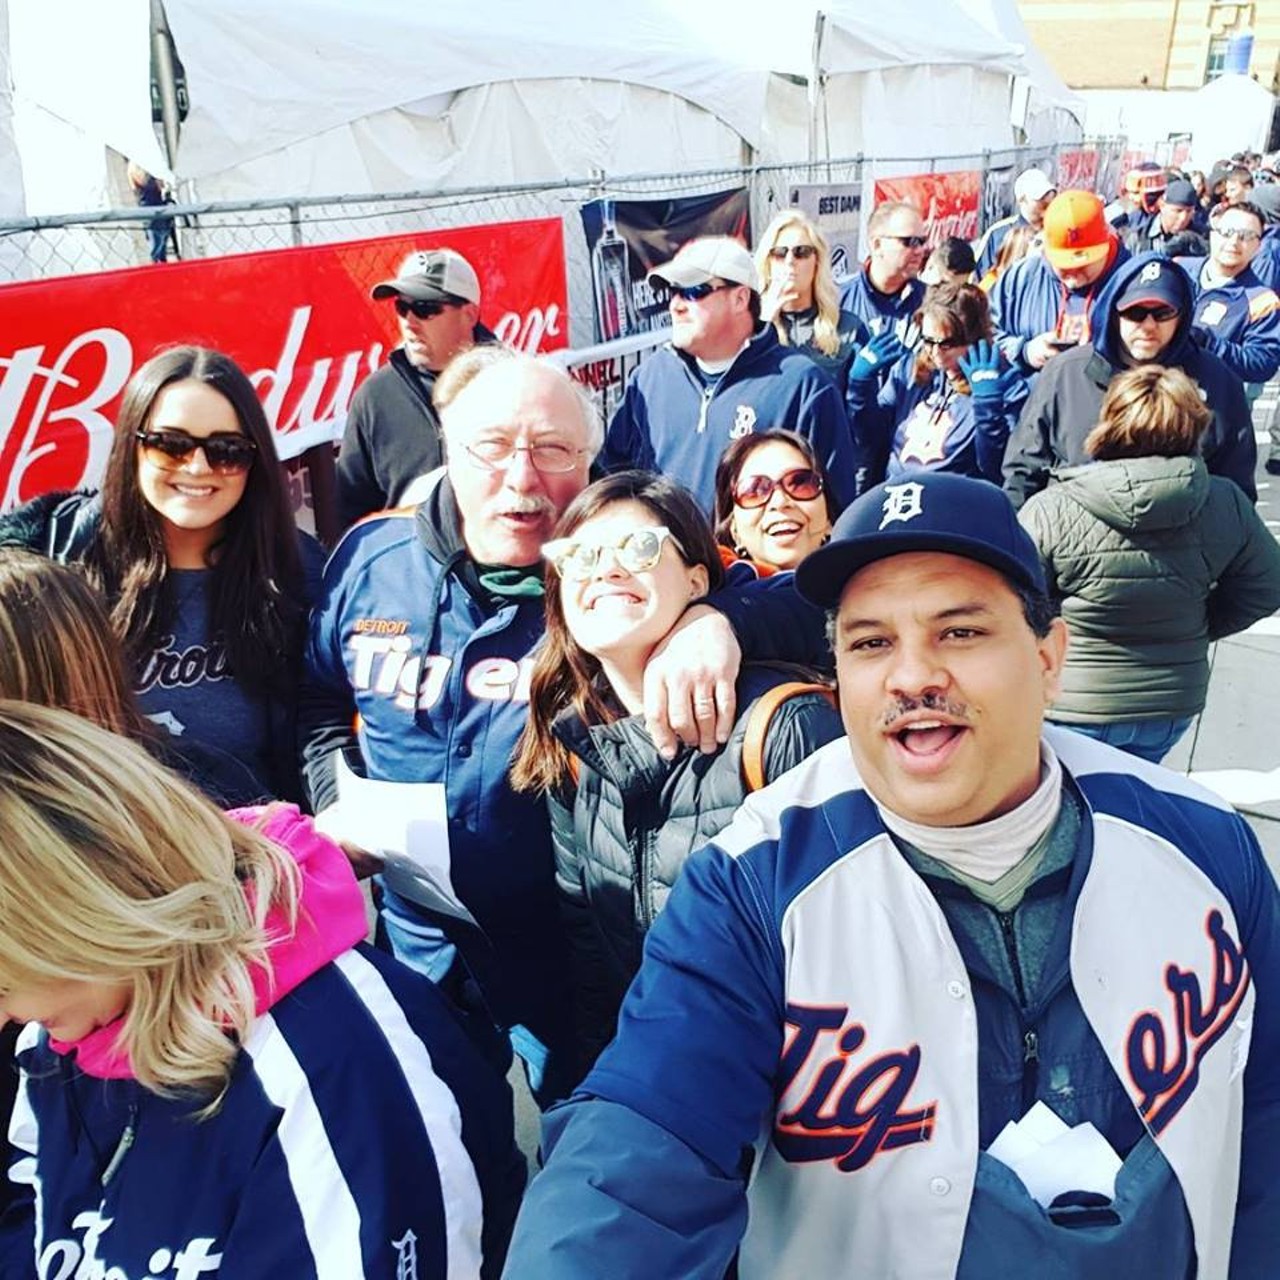 Tigers Opening Day 
Love it or hate it, opening day is a rite of passage 'round these parts. Whether you're simply trying to get to work and avoid the crowds, or getting so drunk you pass out on the sidewalk, an opening day selfie proves you're part of this amazing city we call Detroit.
Photo via Facebook, Carlos Perozo 